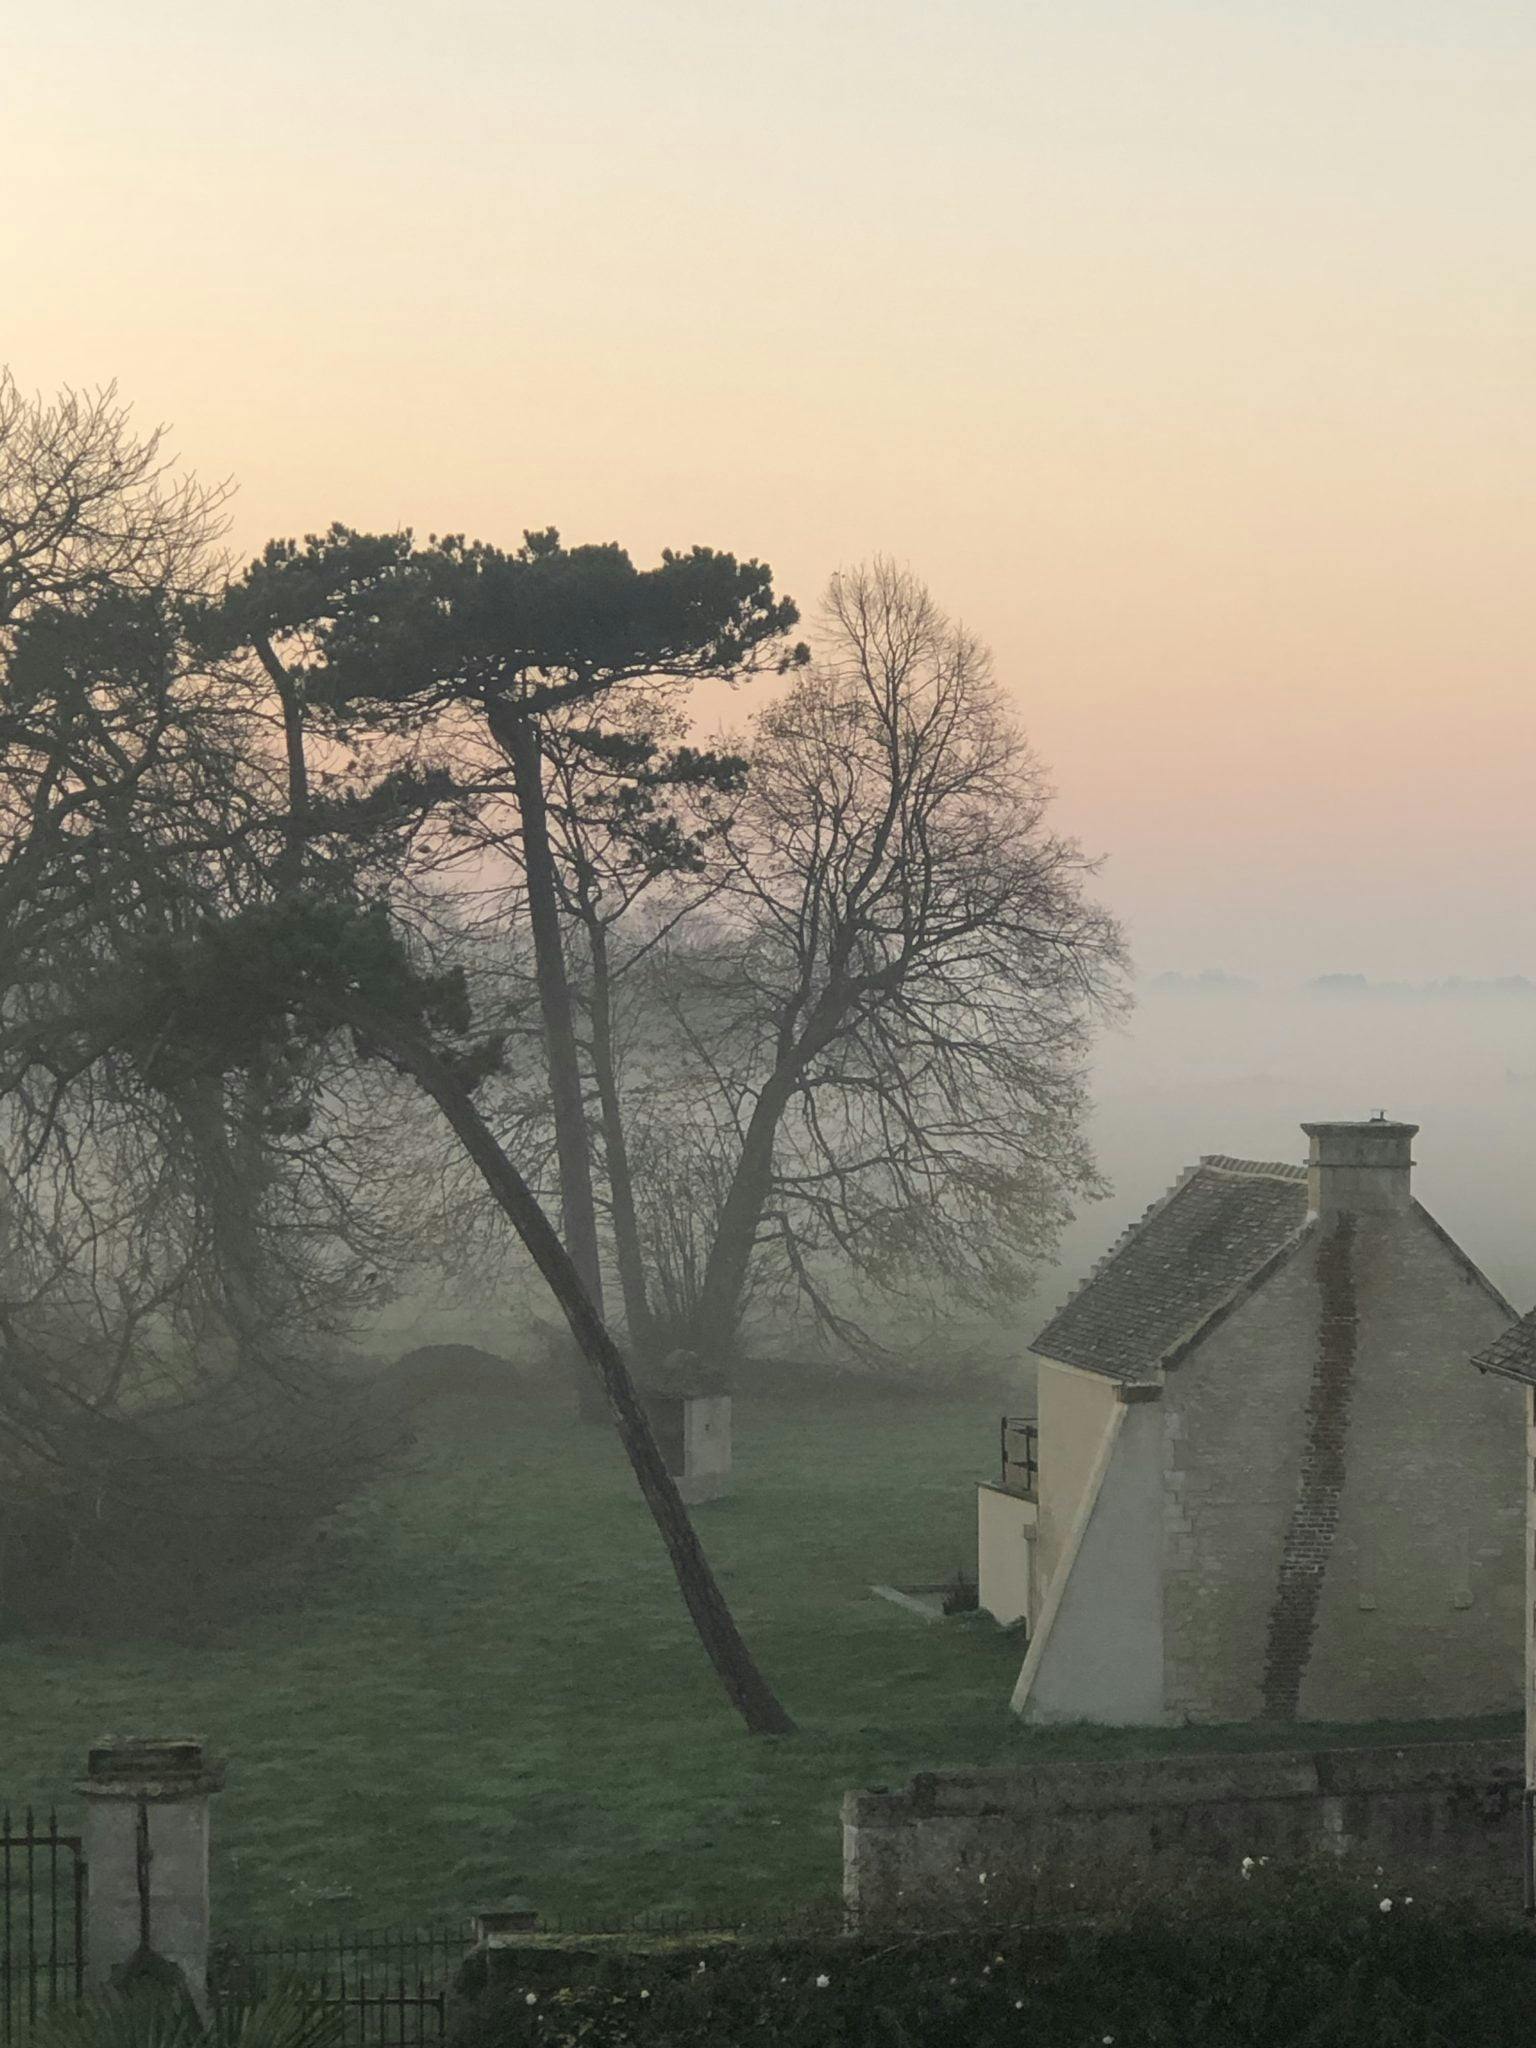 The house in the morning mist